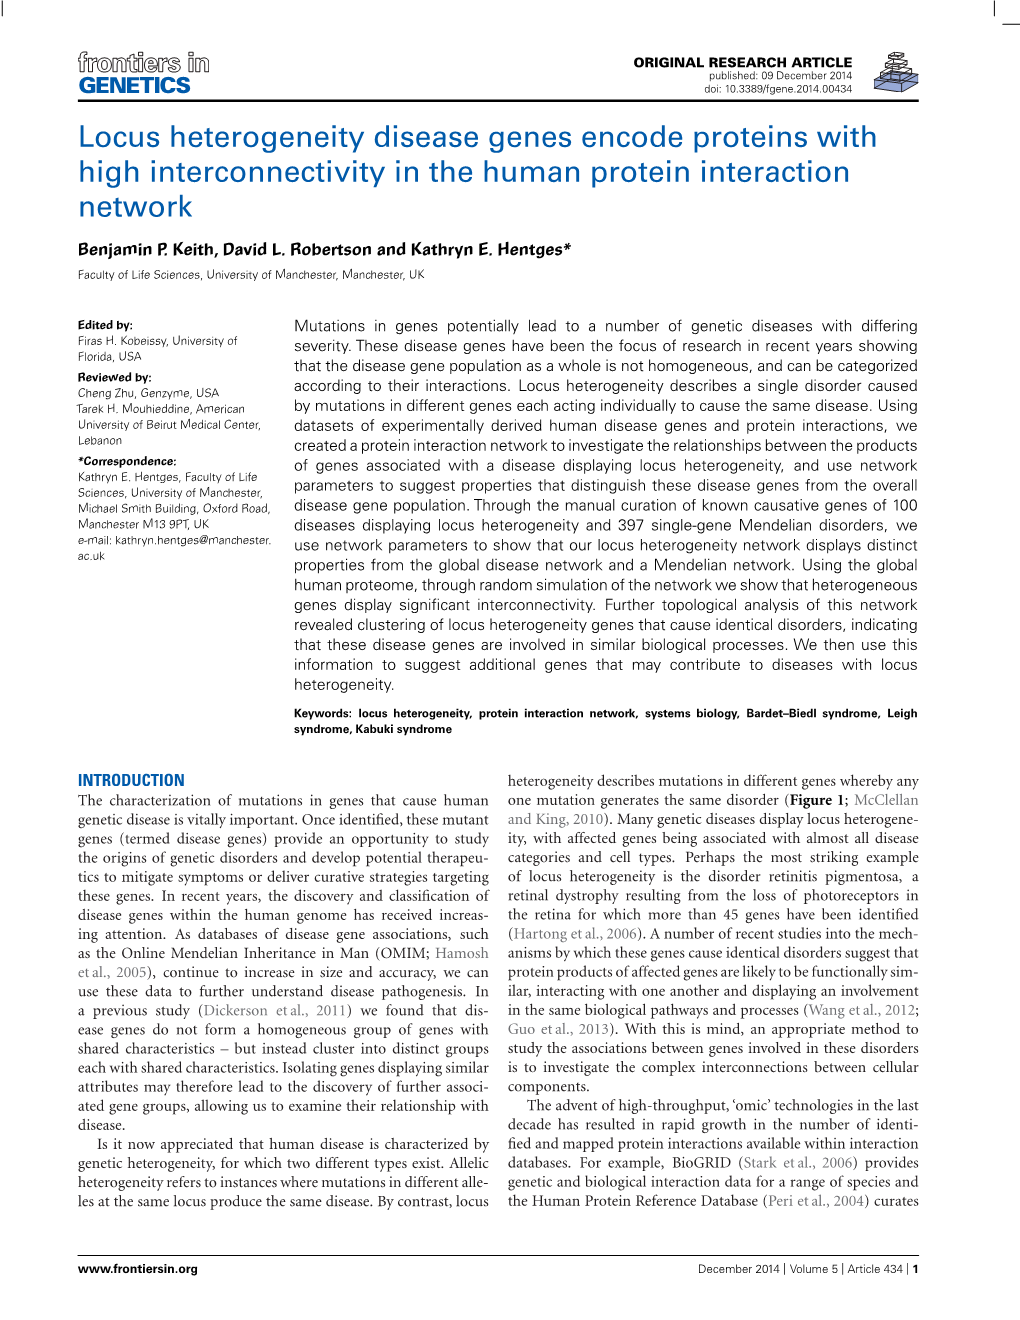 Locus Heterogeneity Disease Genes Encode Proteins with High Interconnectivity in the Human Protein Interaction Network